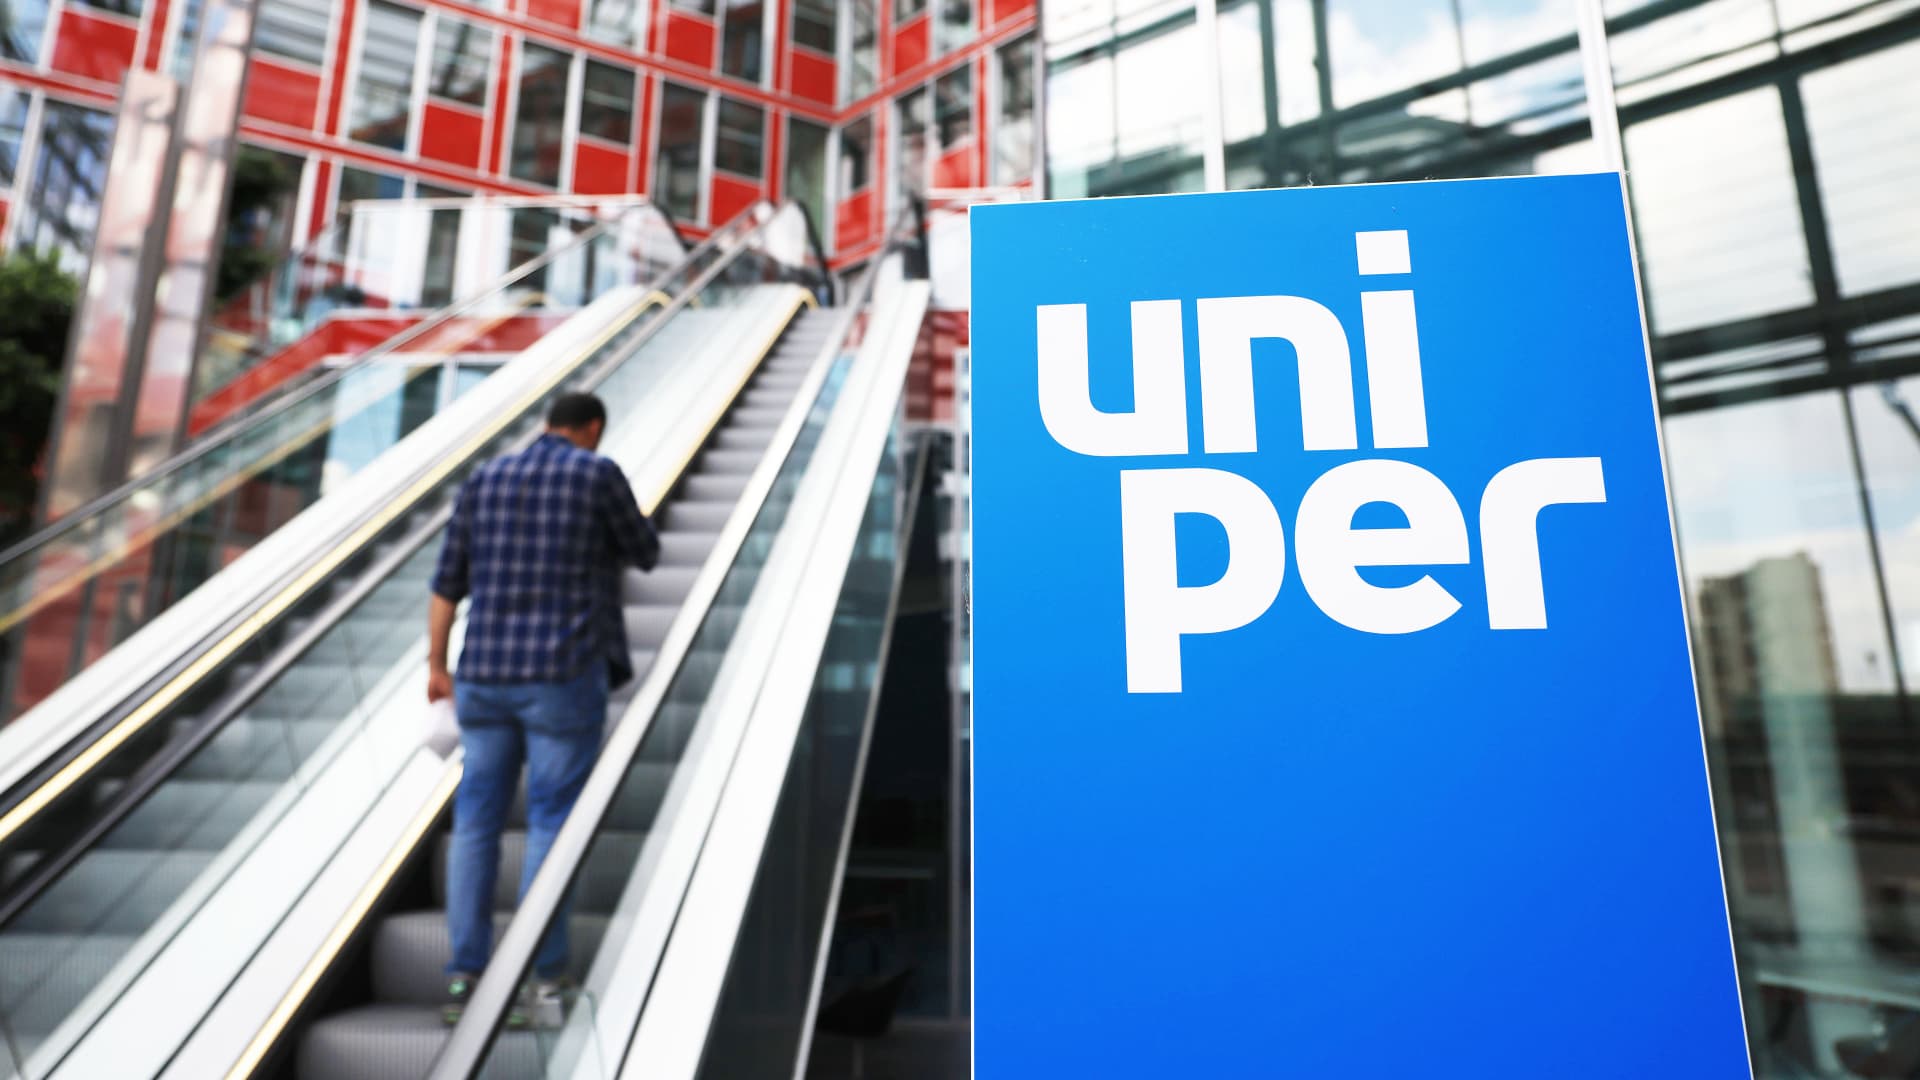 Uniper has been in talks with the German government about a possible bailout.